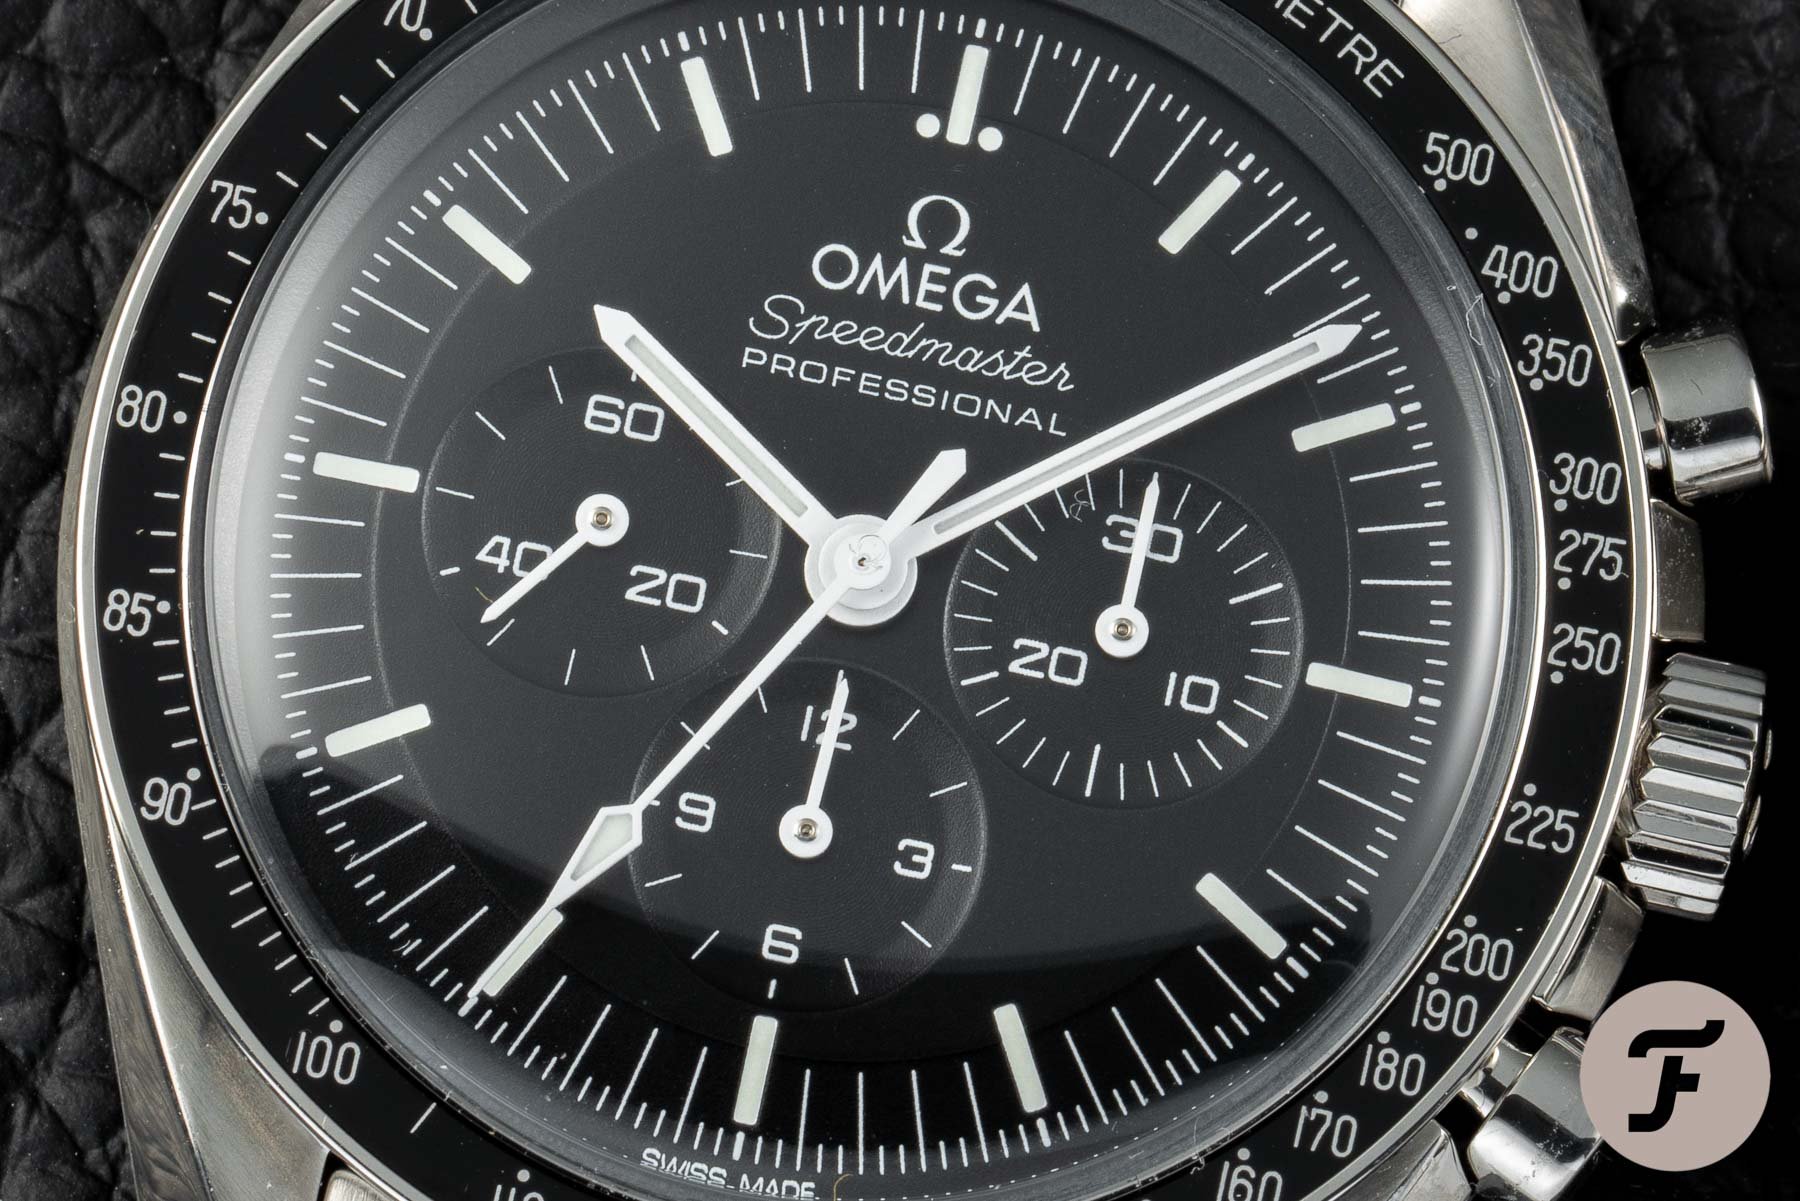 A Year With The Omega Speedmaster - Hands On Review (Updated 2021)